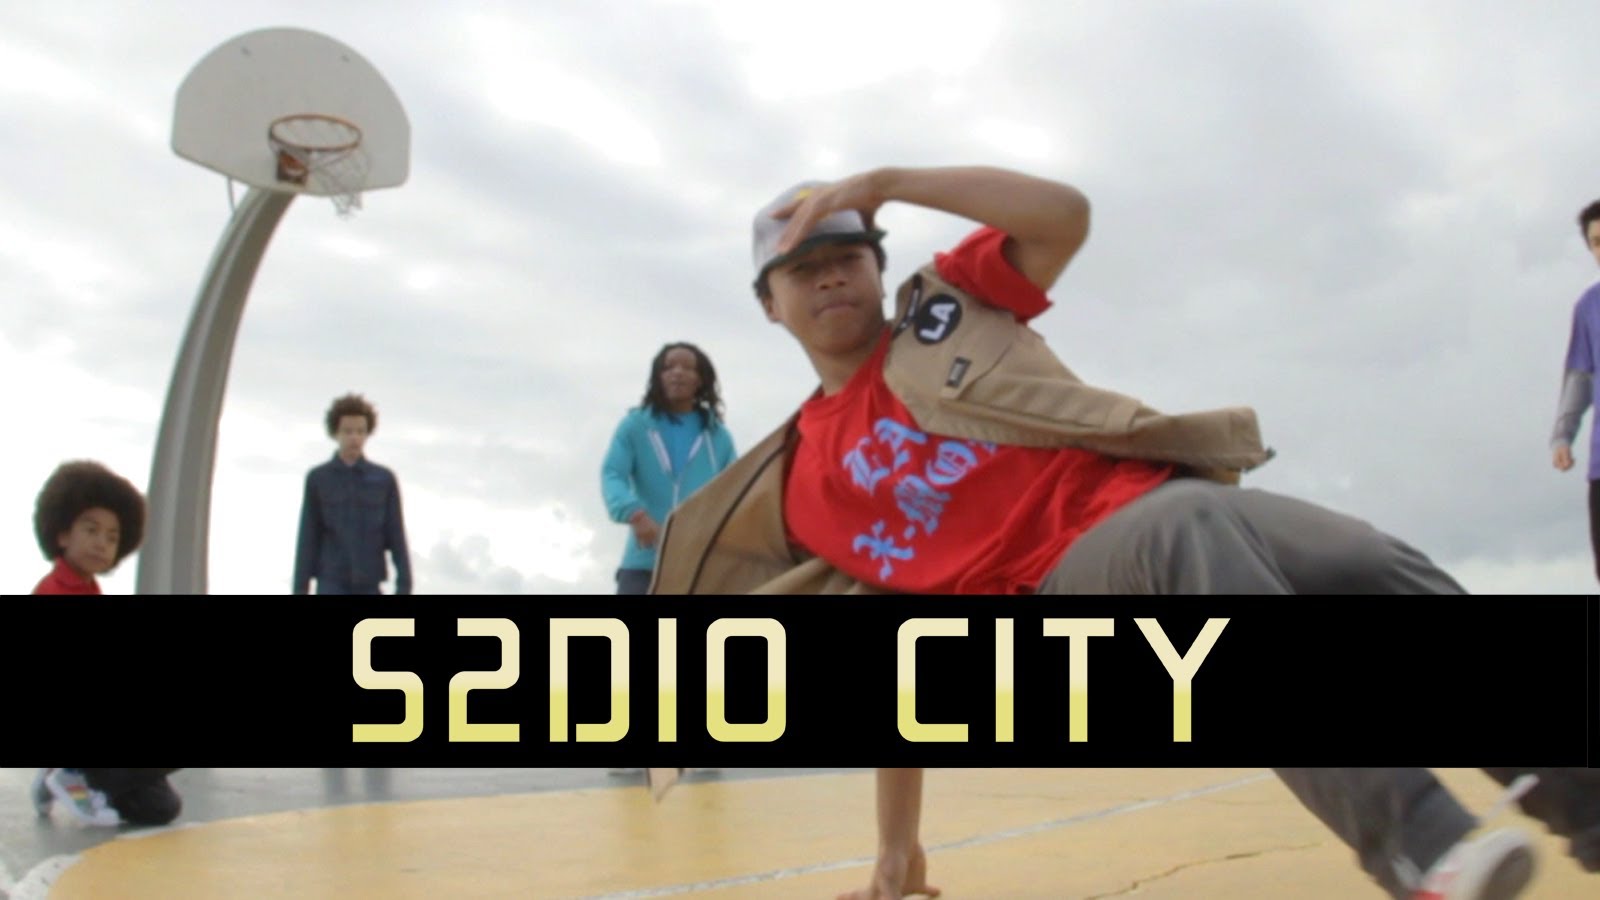 Miles Brown(Baby Boogaloo)is featured along with X-mob & Jacob Pinto in Jon Chu's (S2DIO CITY) webisode called 